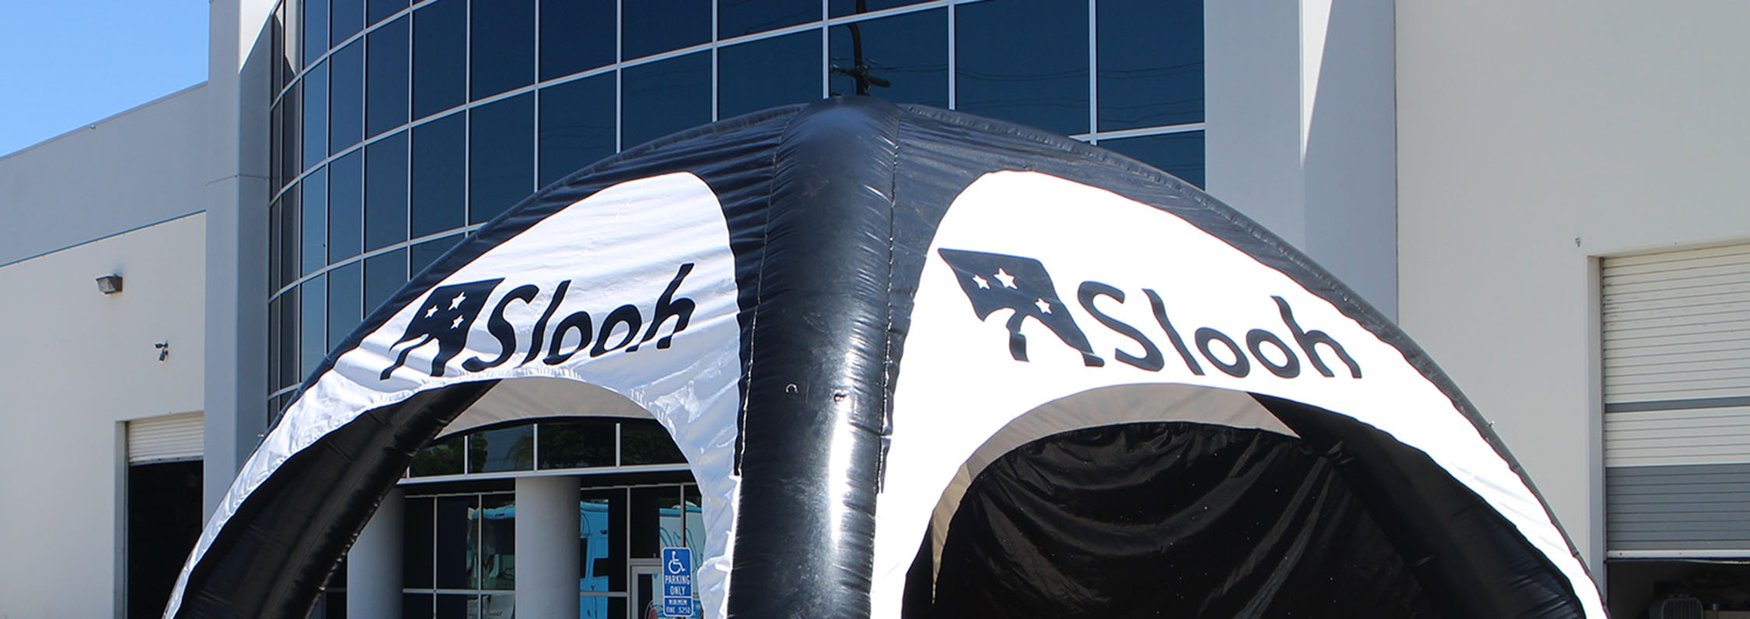 inflatable-arched-tent-header.jpg